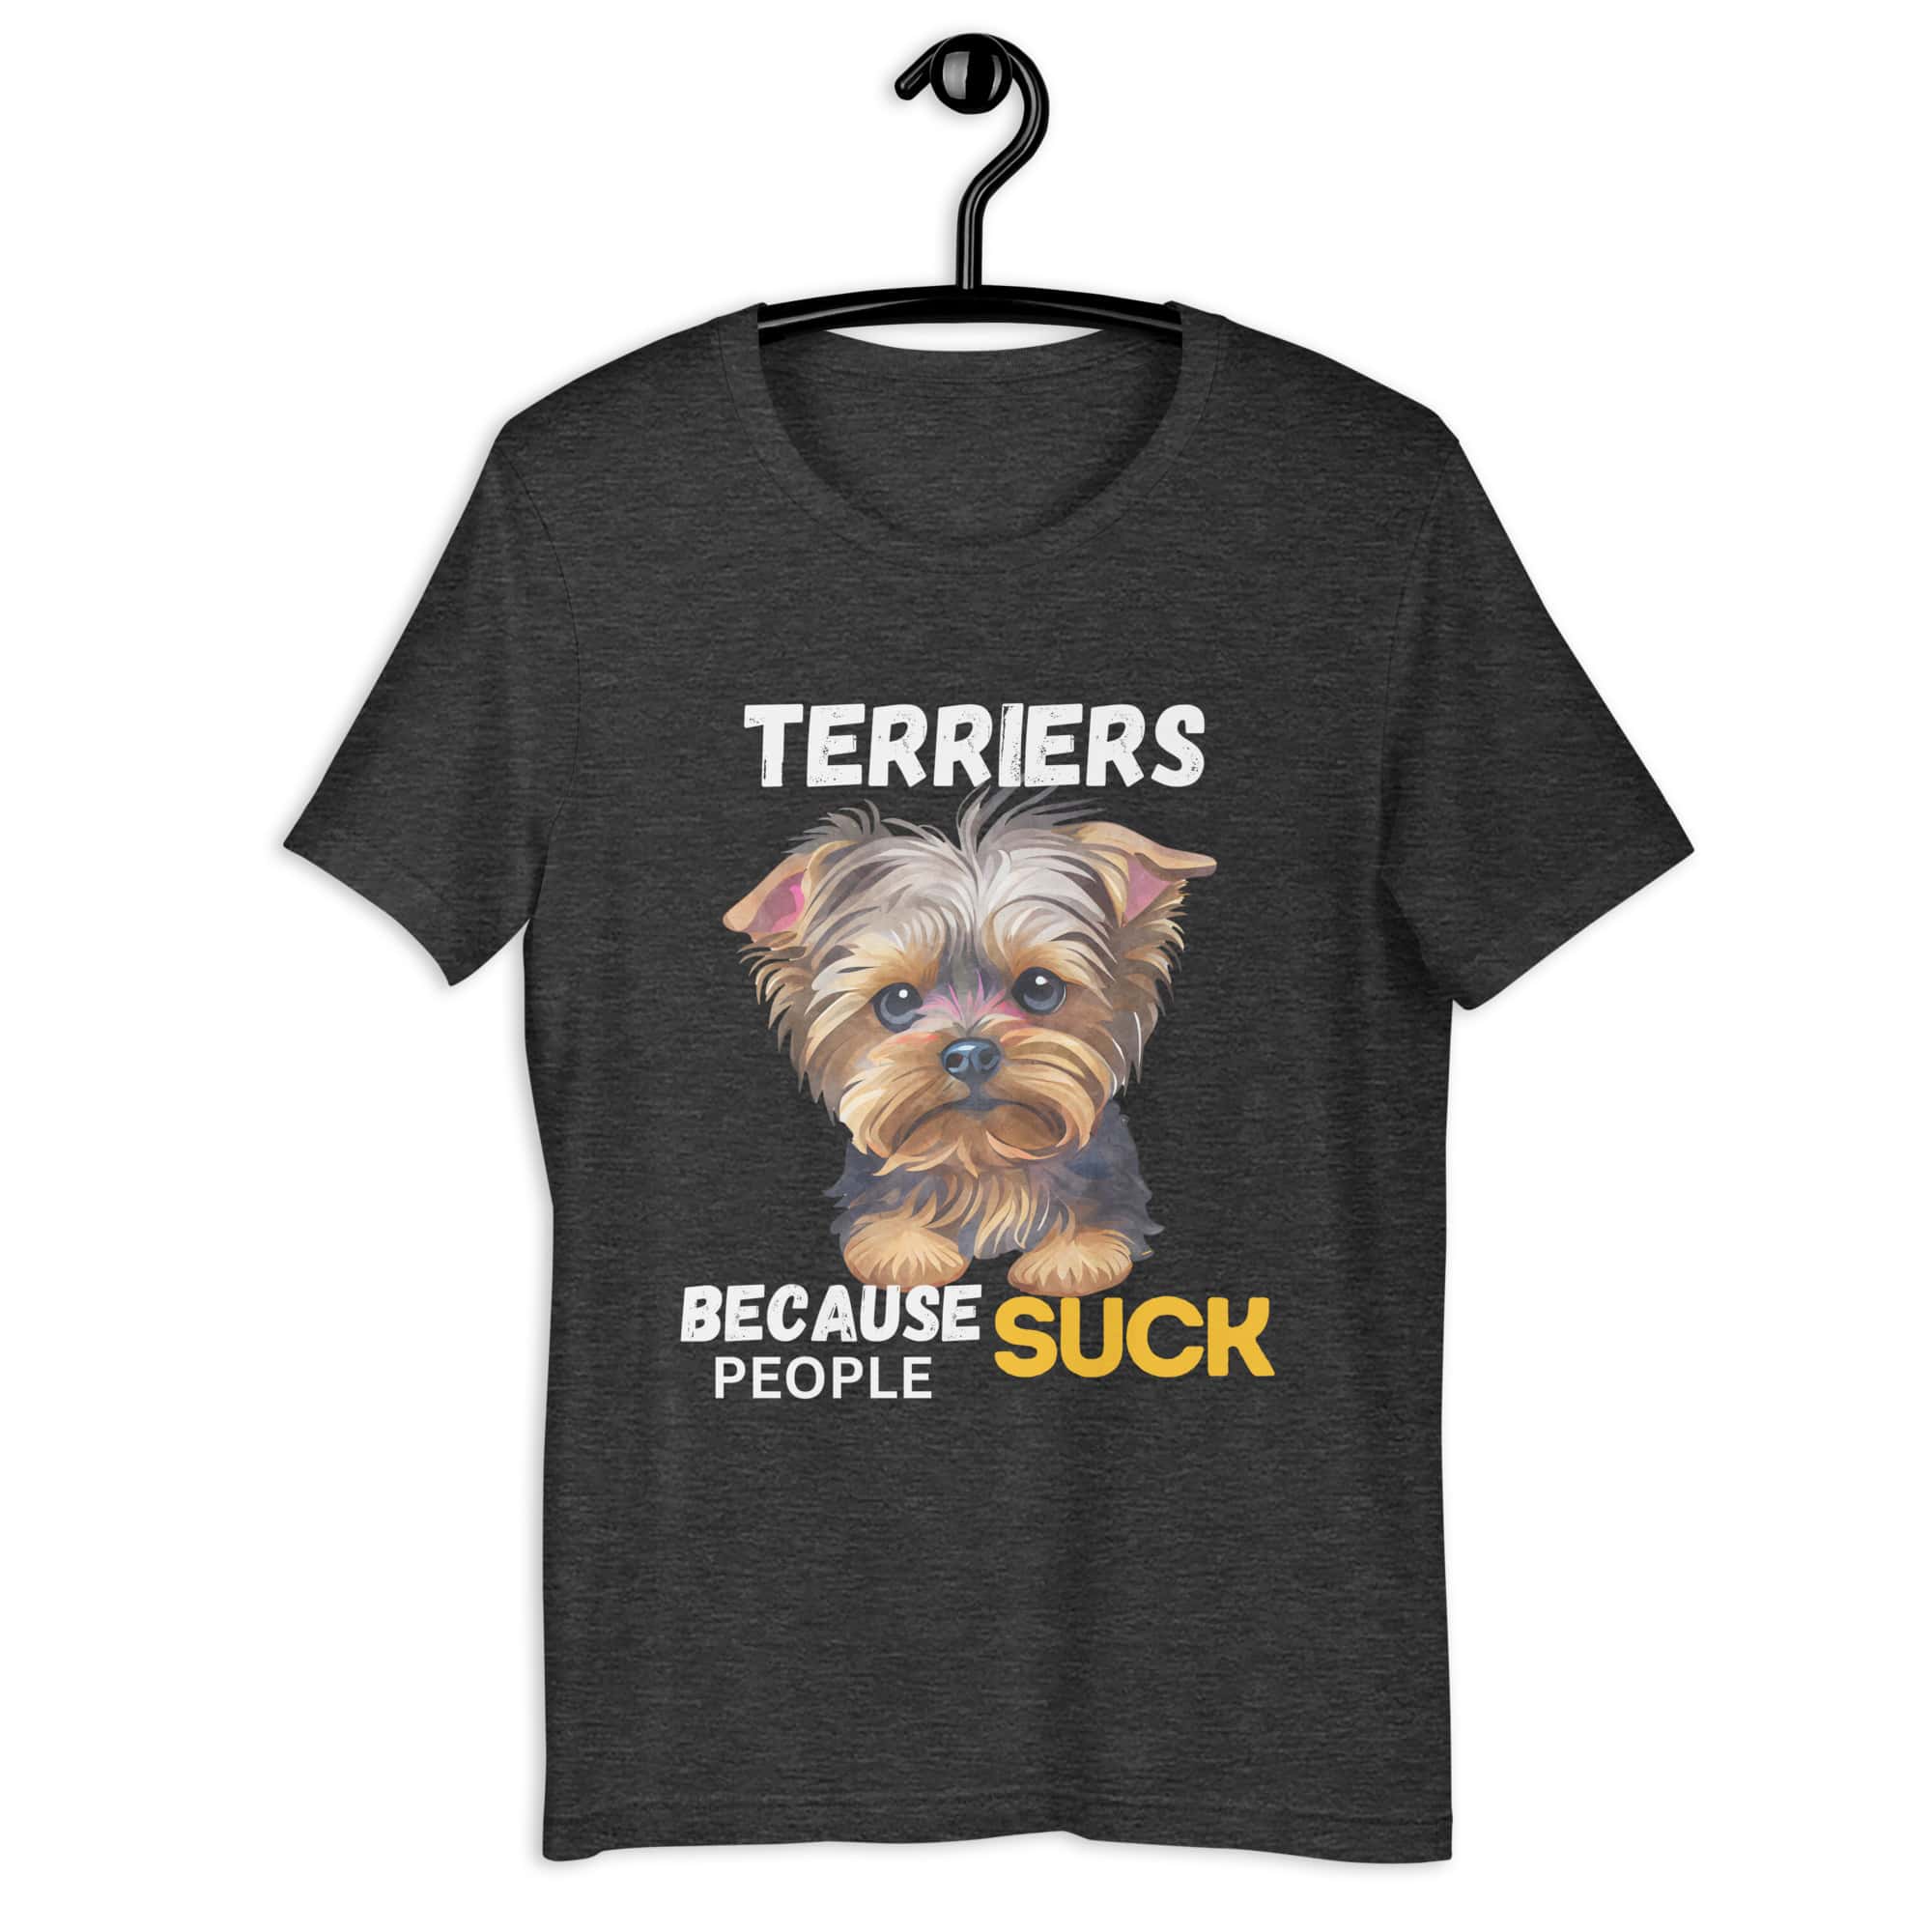 Terriers Because People Suck Unisex T-Shirt matte gray